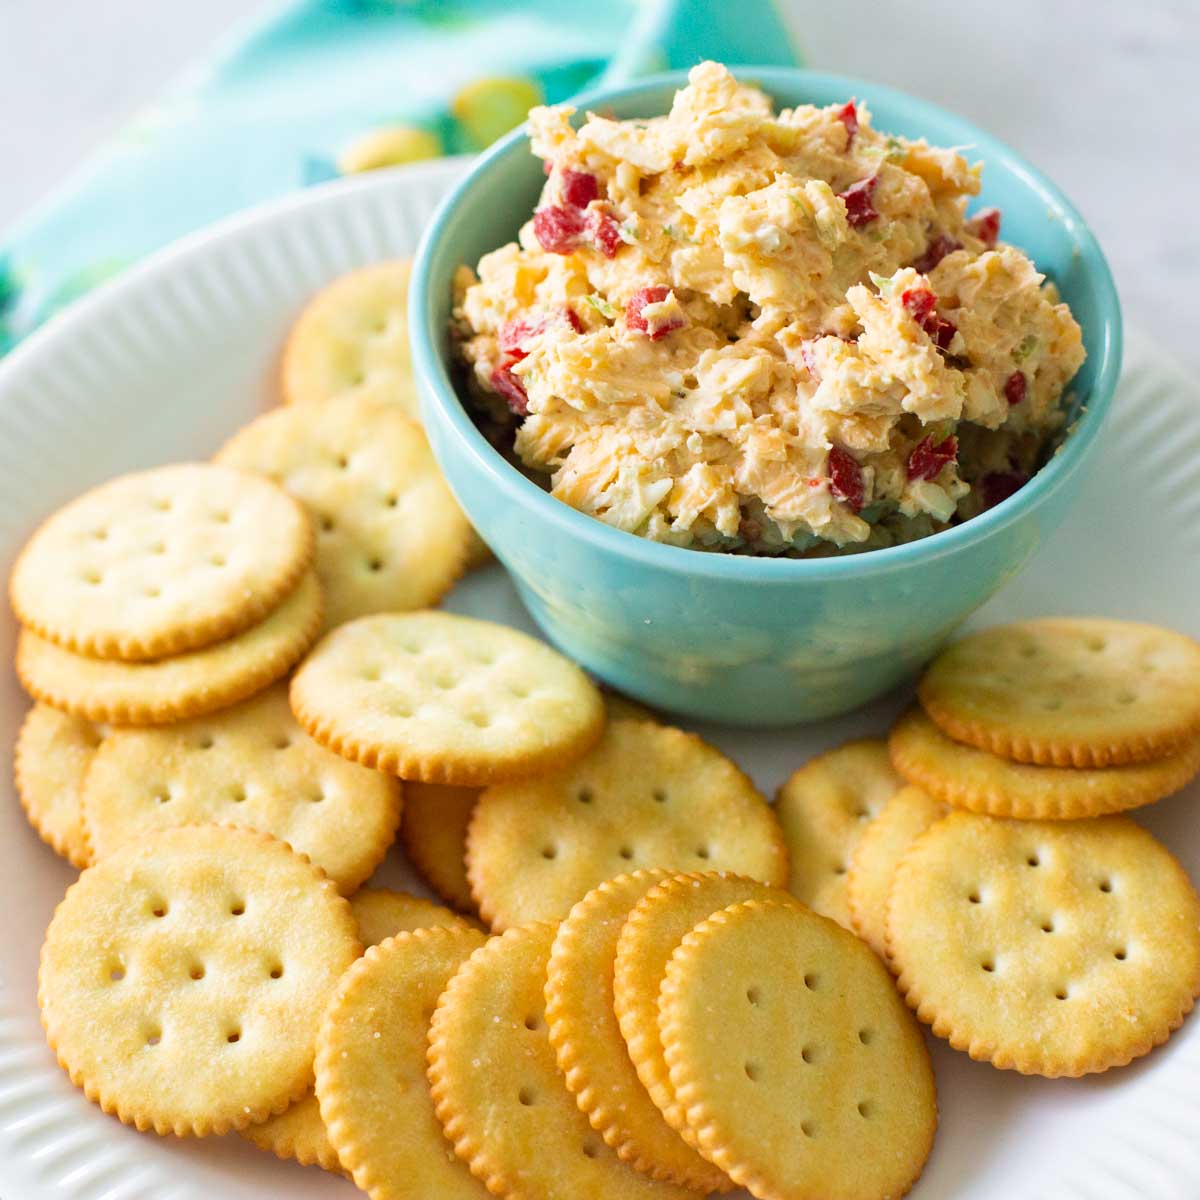 A bowl of homemade pimento cheese is served on a plate with butter crackers.